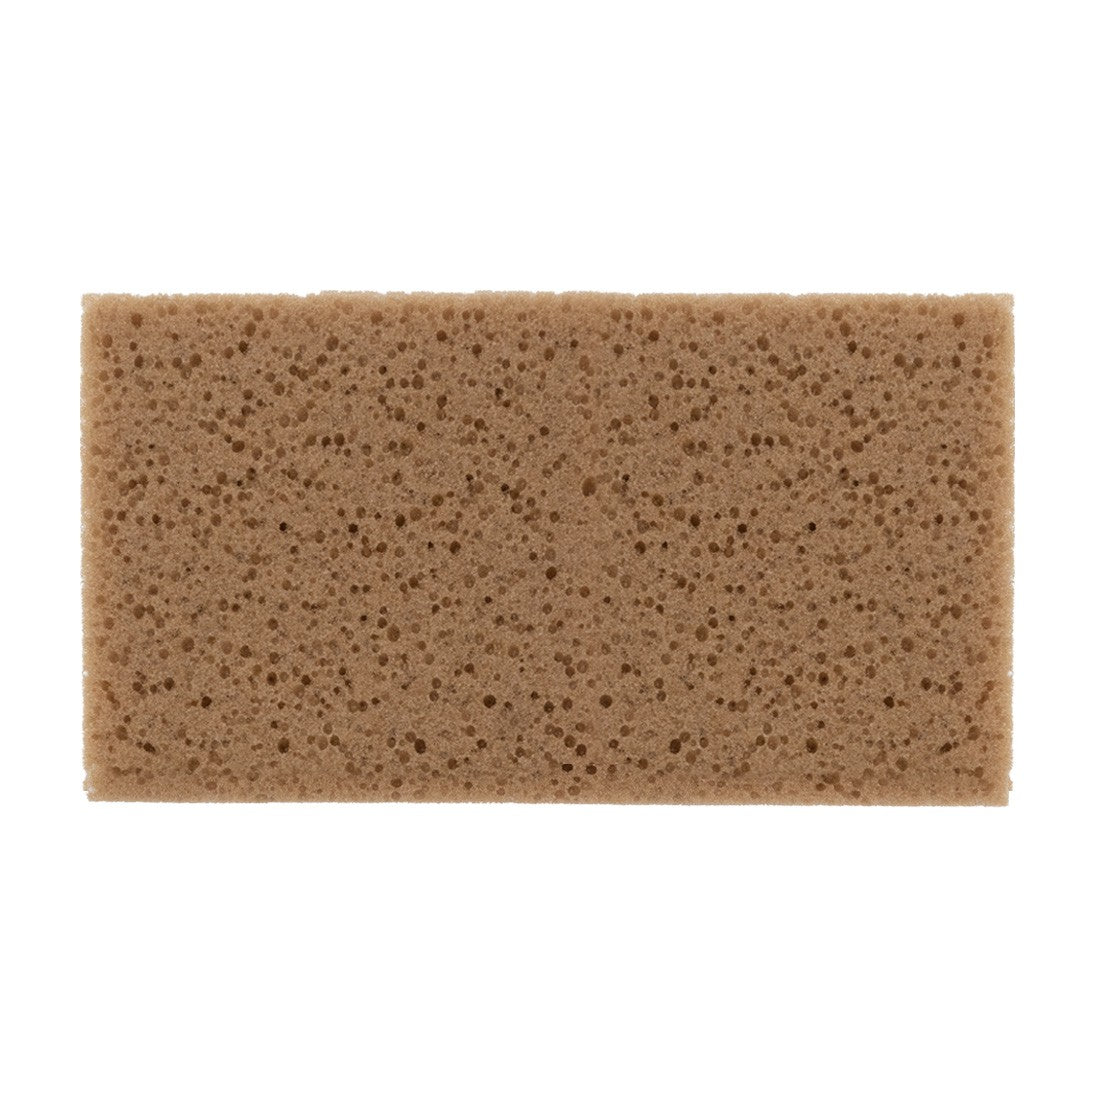 Pulex Sponge for Clamp Top Angle